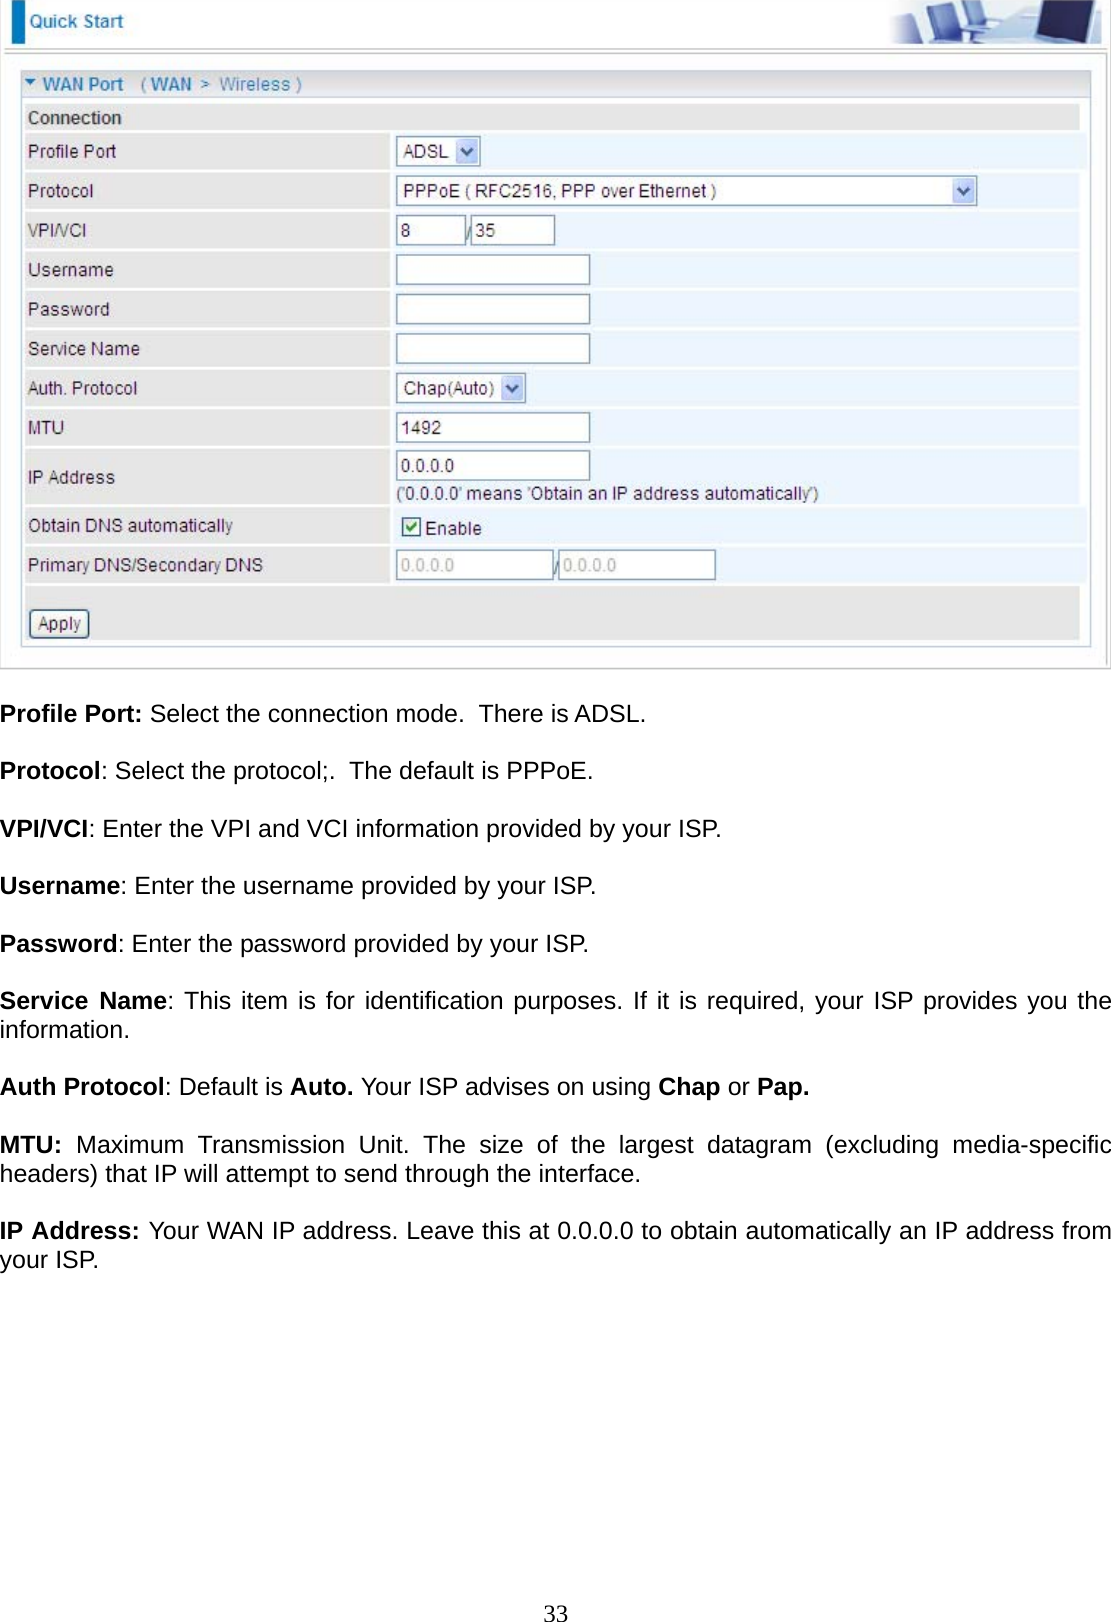 33   Profile Port: Select the connection mode.  There is ADSL.  Protocol: Select the protocol;.  The default is PPPoE.  VPI/VCI: Enter the VPI and VCI information provided by your ISP.  Username: Enter the username provided by your ISP.  Password: Enter the password provided by your ISP.  Service Name: This item is for identification purposes. If it is required, your ISP provides you the information.  Auth Protocol: Default is Auto. Your ISP advises on using Chap or Pap.  MTU:  Maximum Transmission Unit. The size of the largest datagram (excluding media-specific headers) that IP will attempt to send through the interface.  IP Address: Your WAN IP address. Leave this at 0.0.0.0 to obtain automatically an IP address from your ISP.              